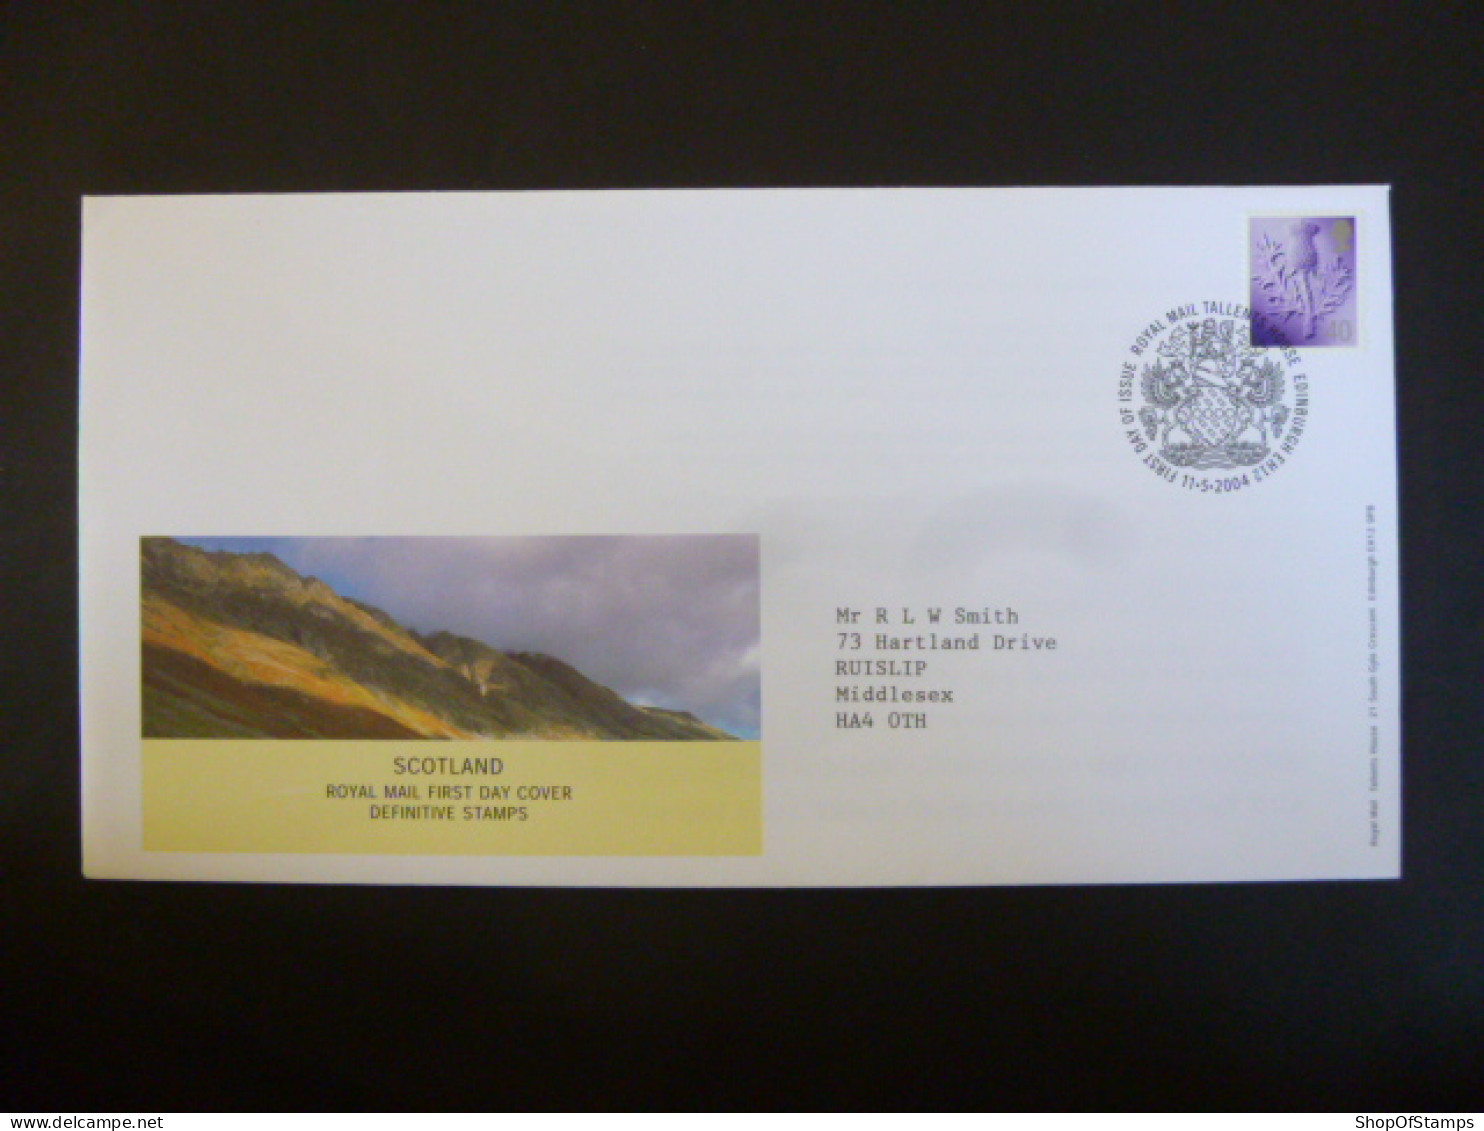 GREAT BRITAIN SG S112 FDC ROYAL MAIL TALENT HOUSE EDINBURGH - Unclassified